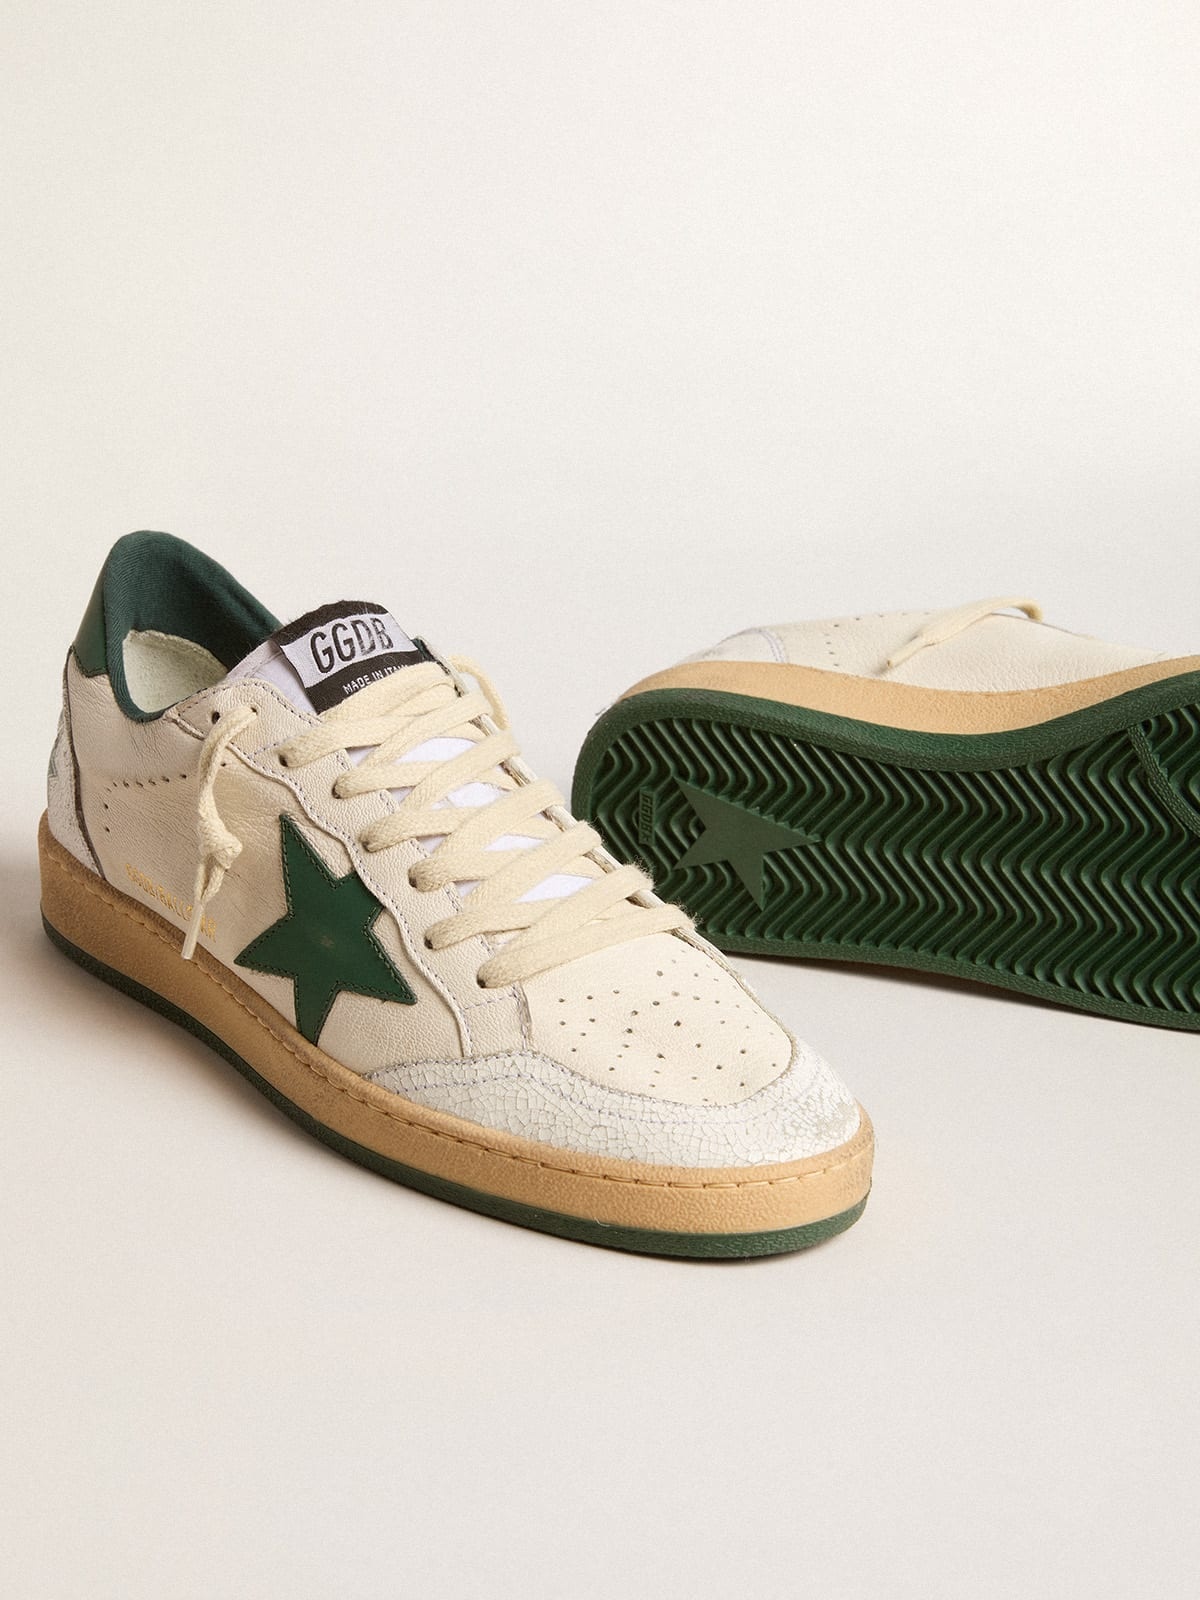 Men's Ball Star Wishes in white nappa leather with green leather star and heel tab - 4